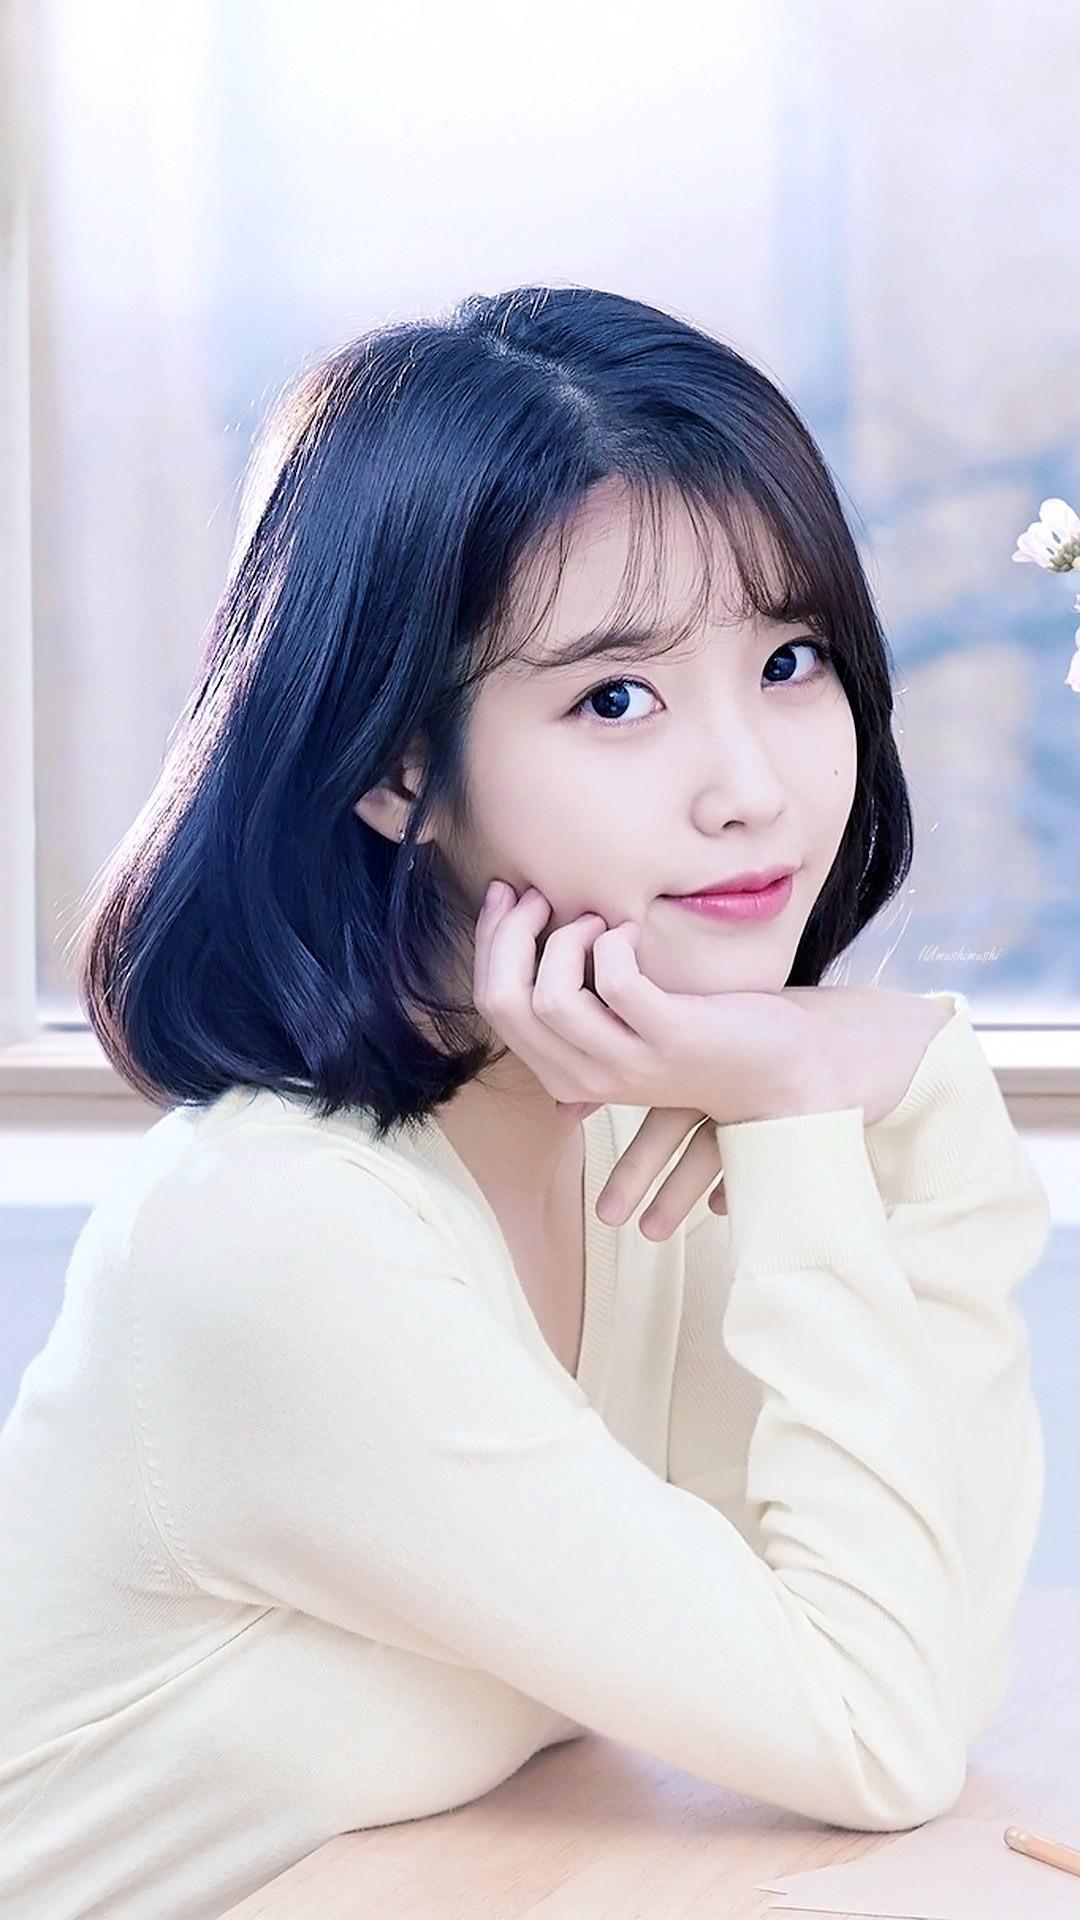 Iu Wallpaper Iu Wallpapers Wallpaper Cave Iu Wallpapers 4k Hd For